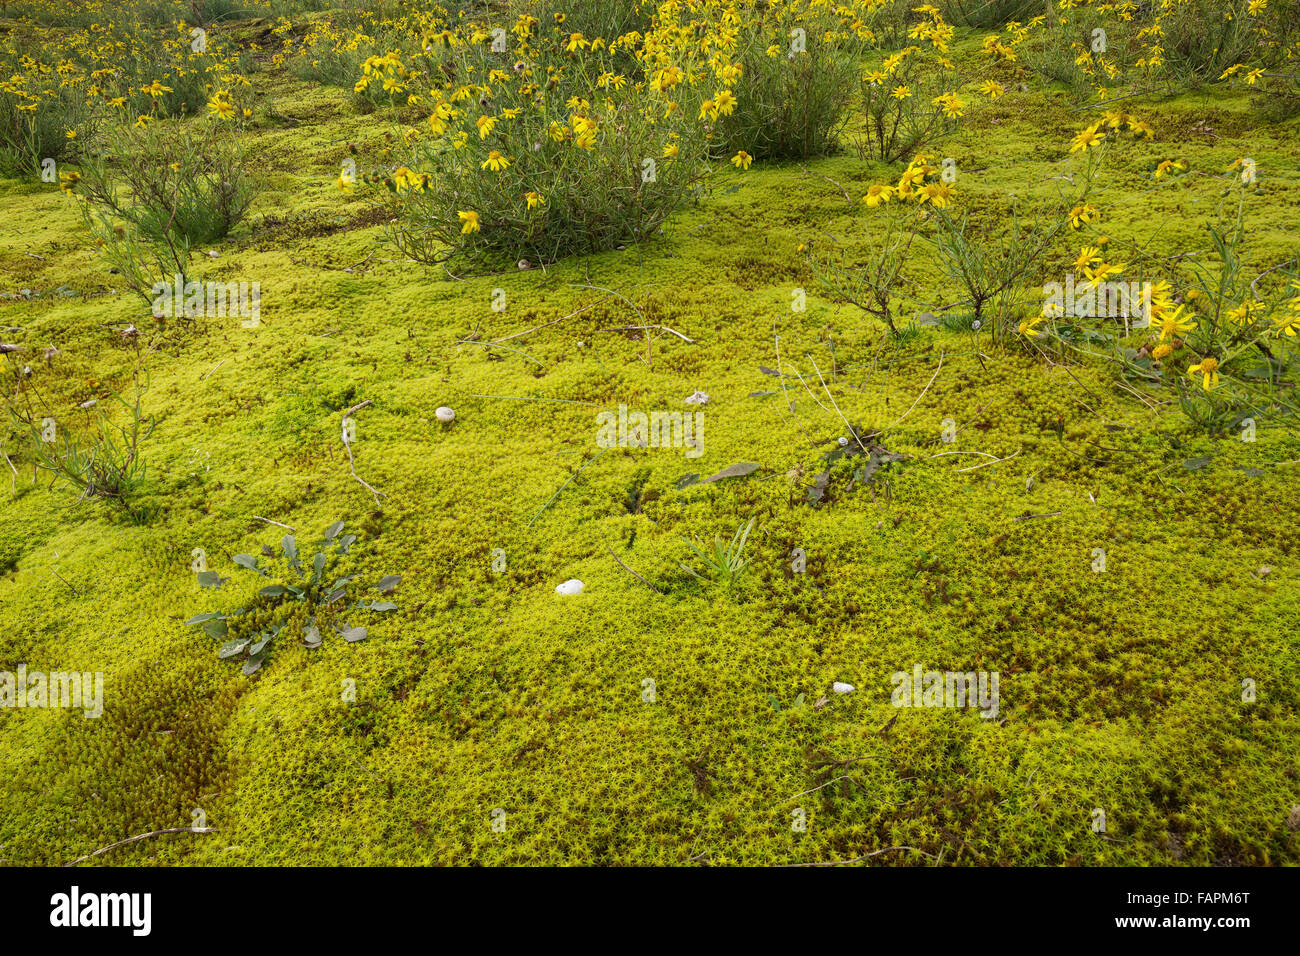 Star moss and blooming narrow-leaved ragwort in the dunes at the Belgian coast Stock Photo